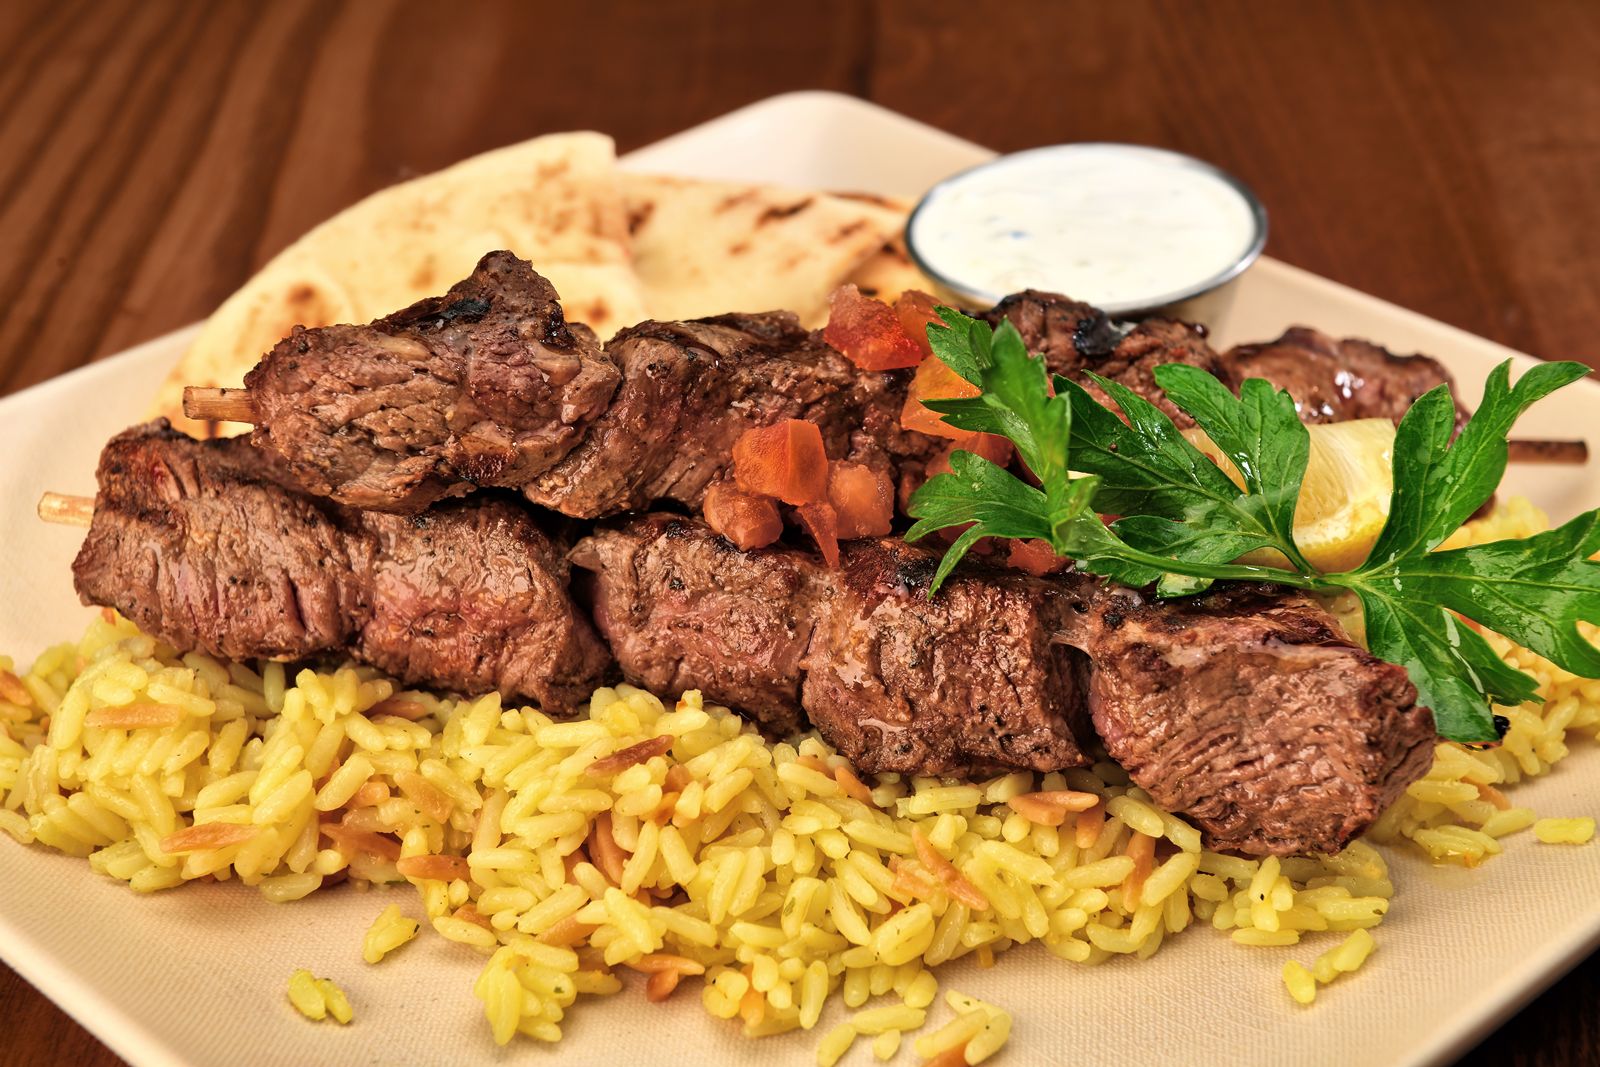 The Great Greek Mediterranean Grill Accelerates Expansion With the Launch of Non-Traditional Dining Formats